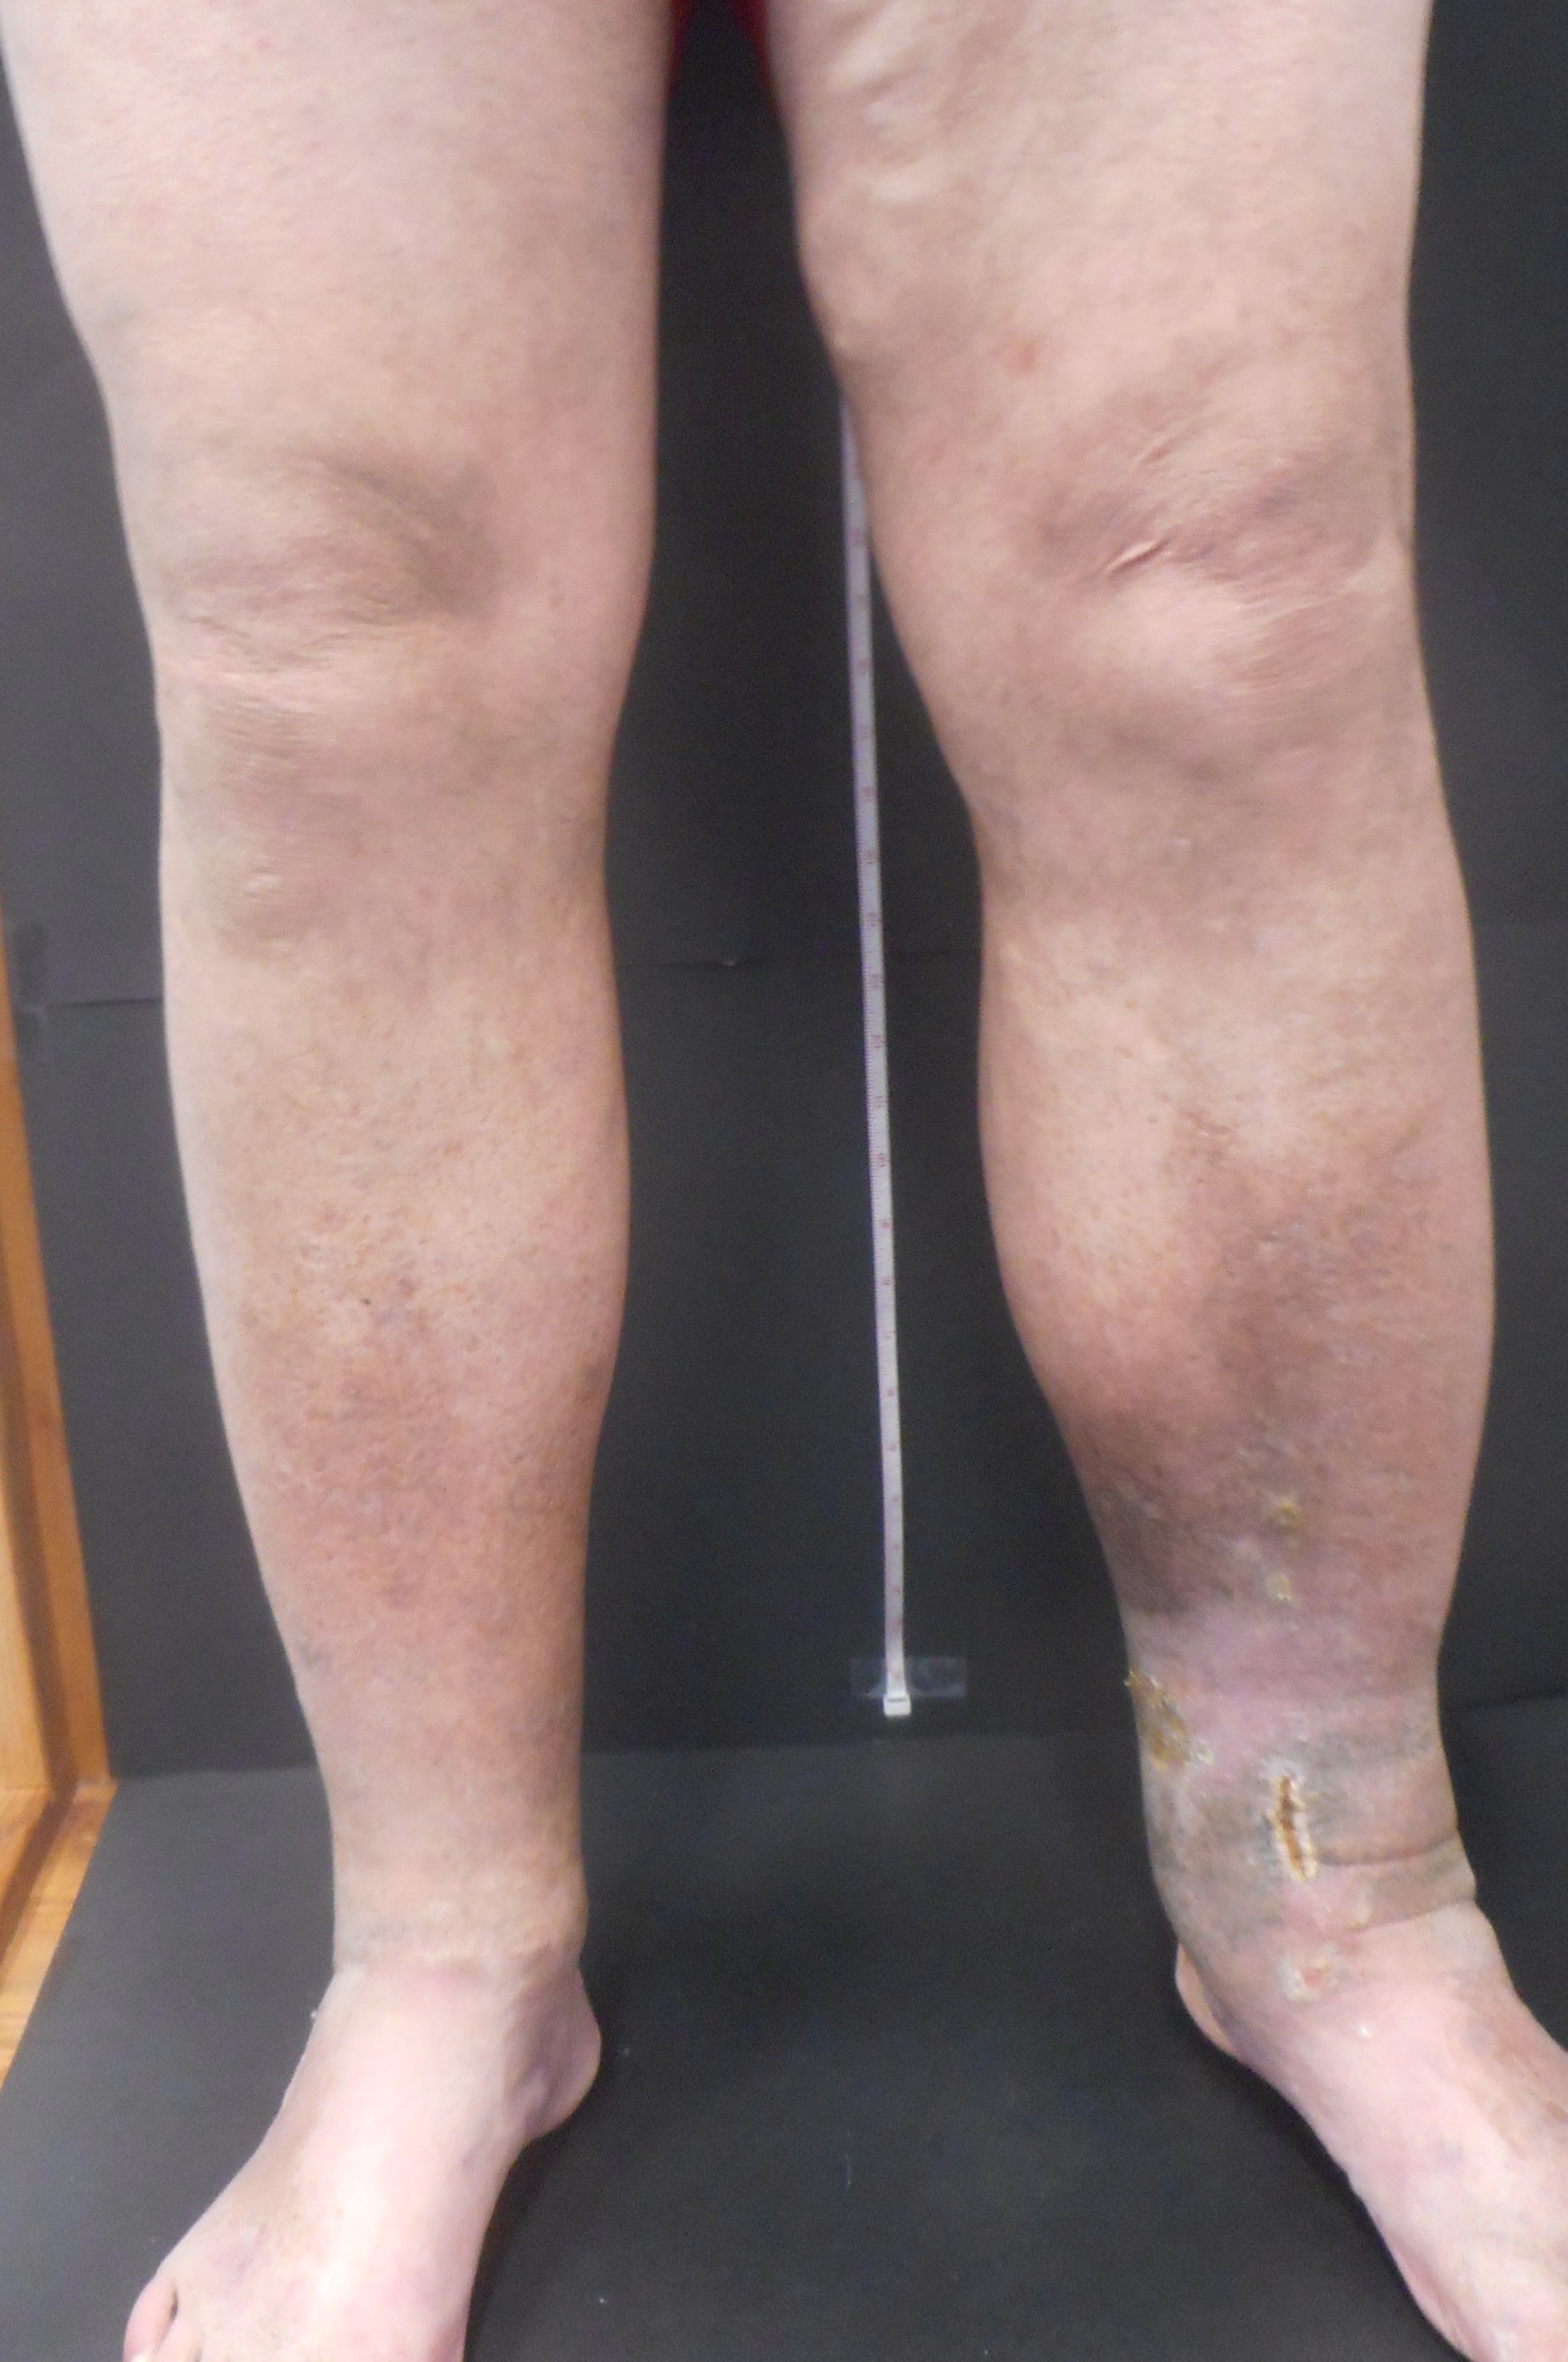 Do You Have Unexplained Swelling In Your Left Leg? What Does It Mean? -  Vein Specialists of the Carolinas